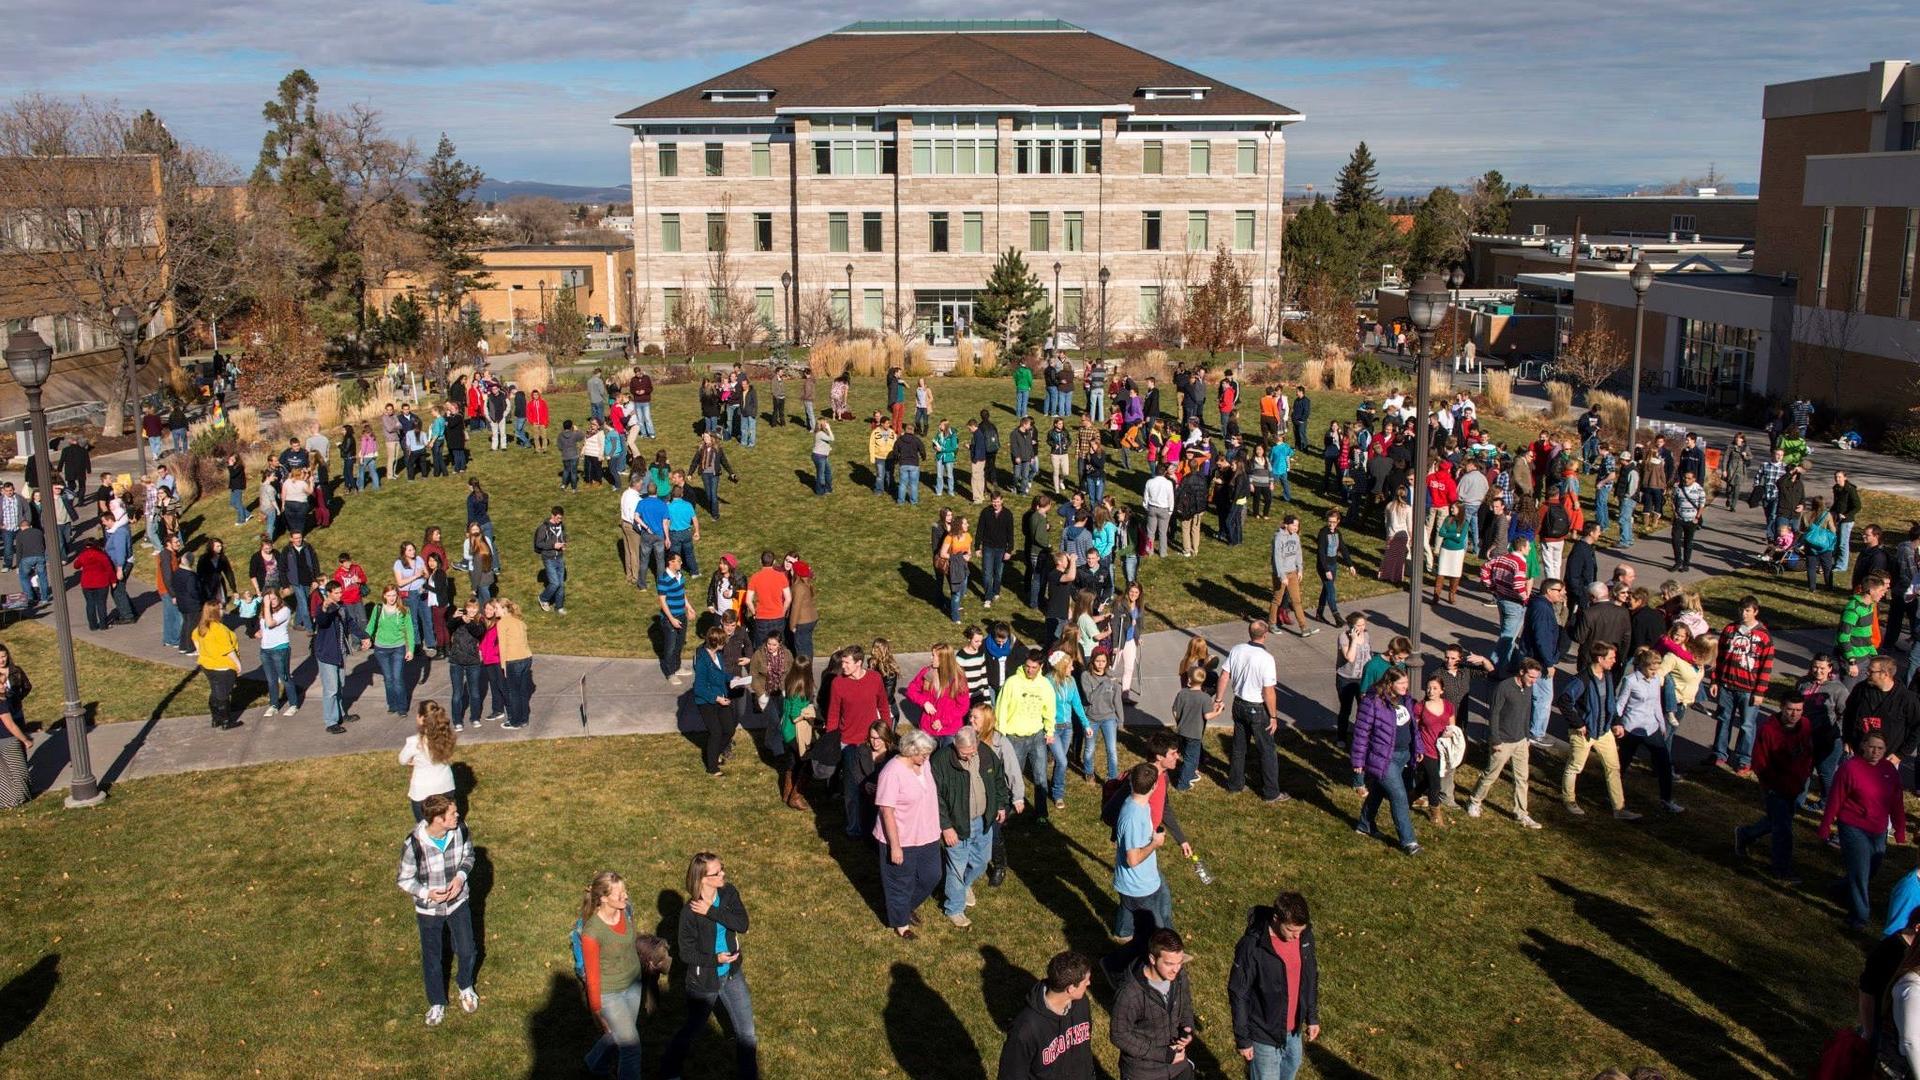 College campus crowded with multiple people